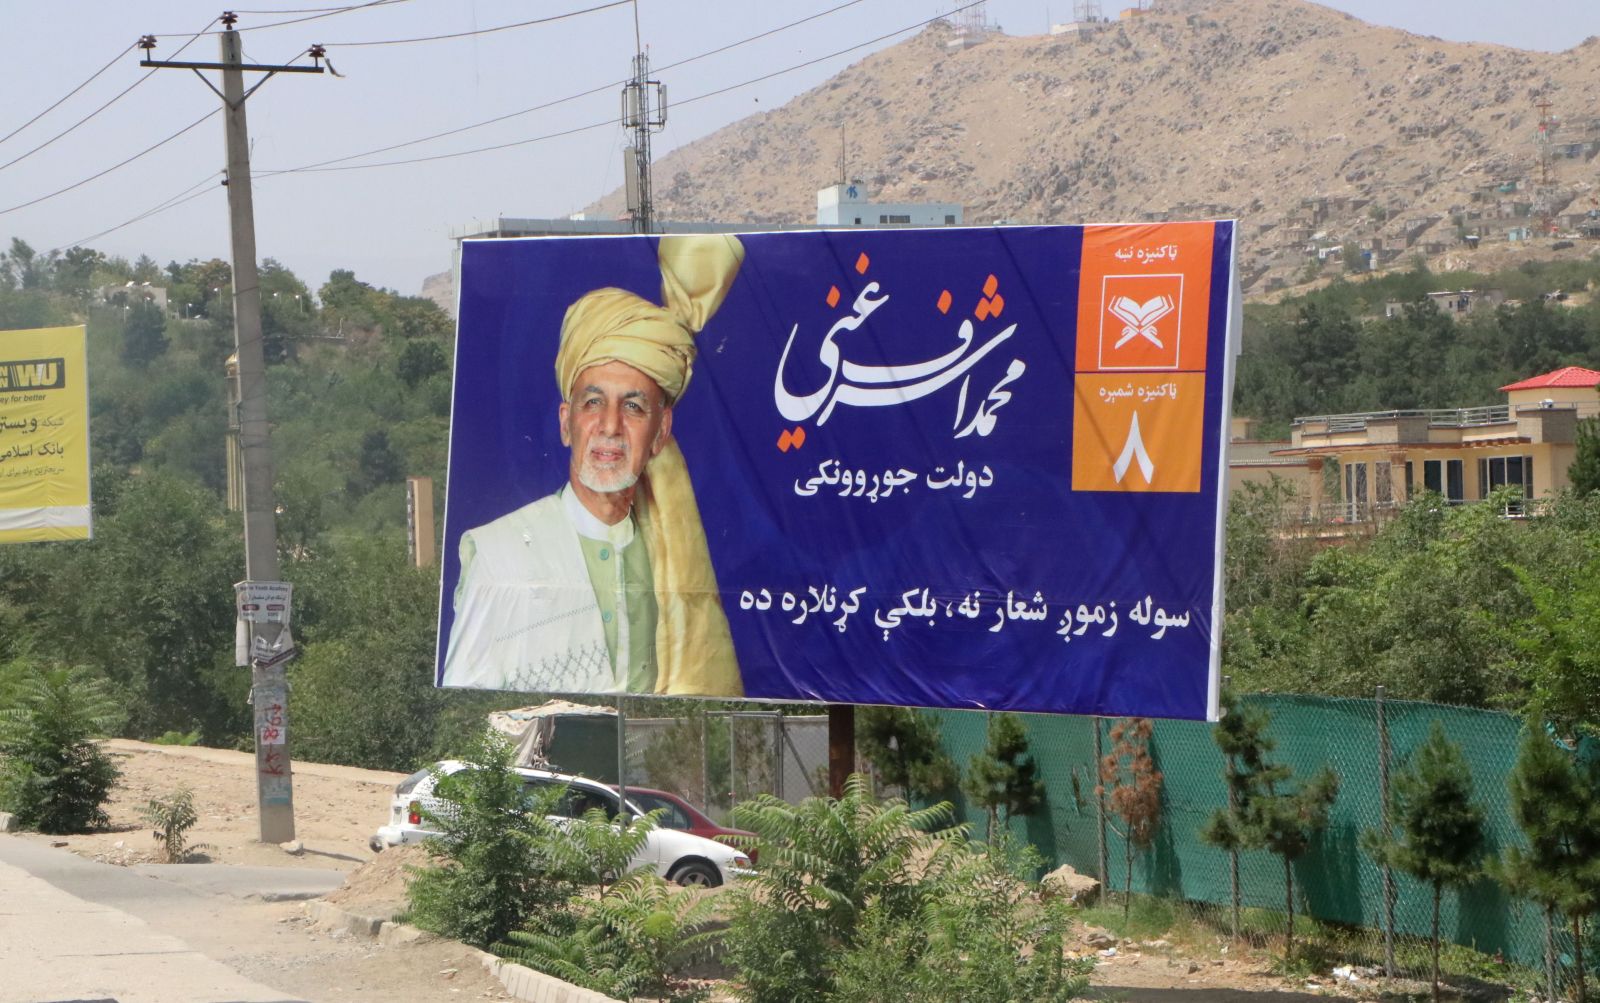 President Ashraf Ghani wants to be re-elected: campaign billboard in Kabul.